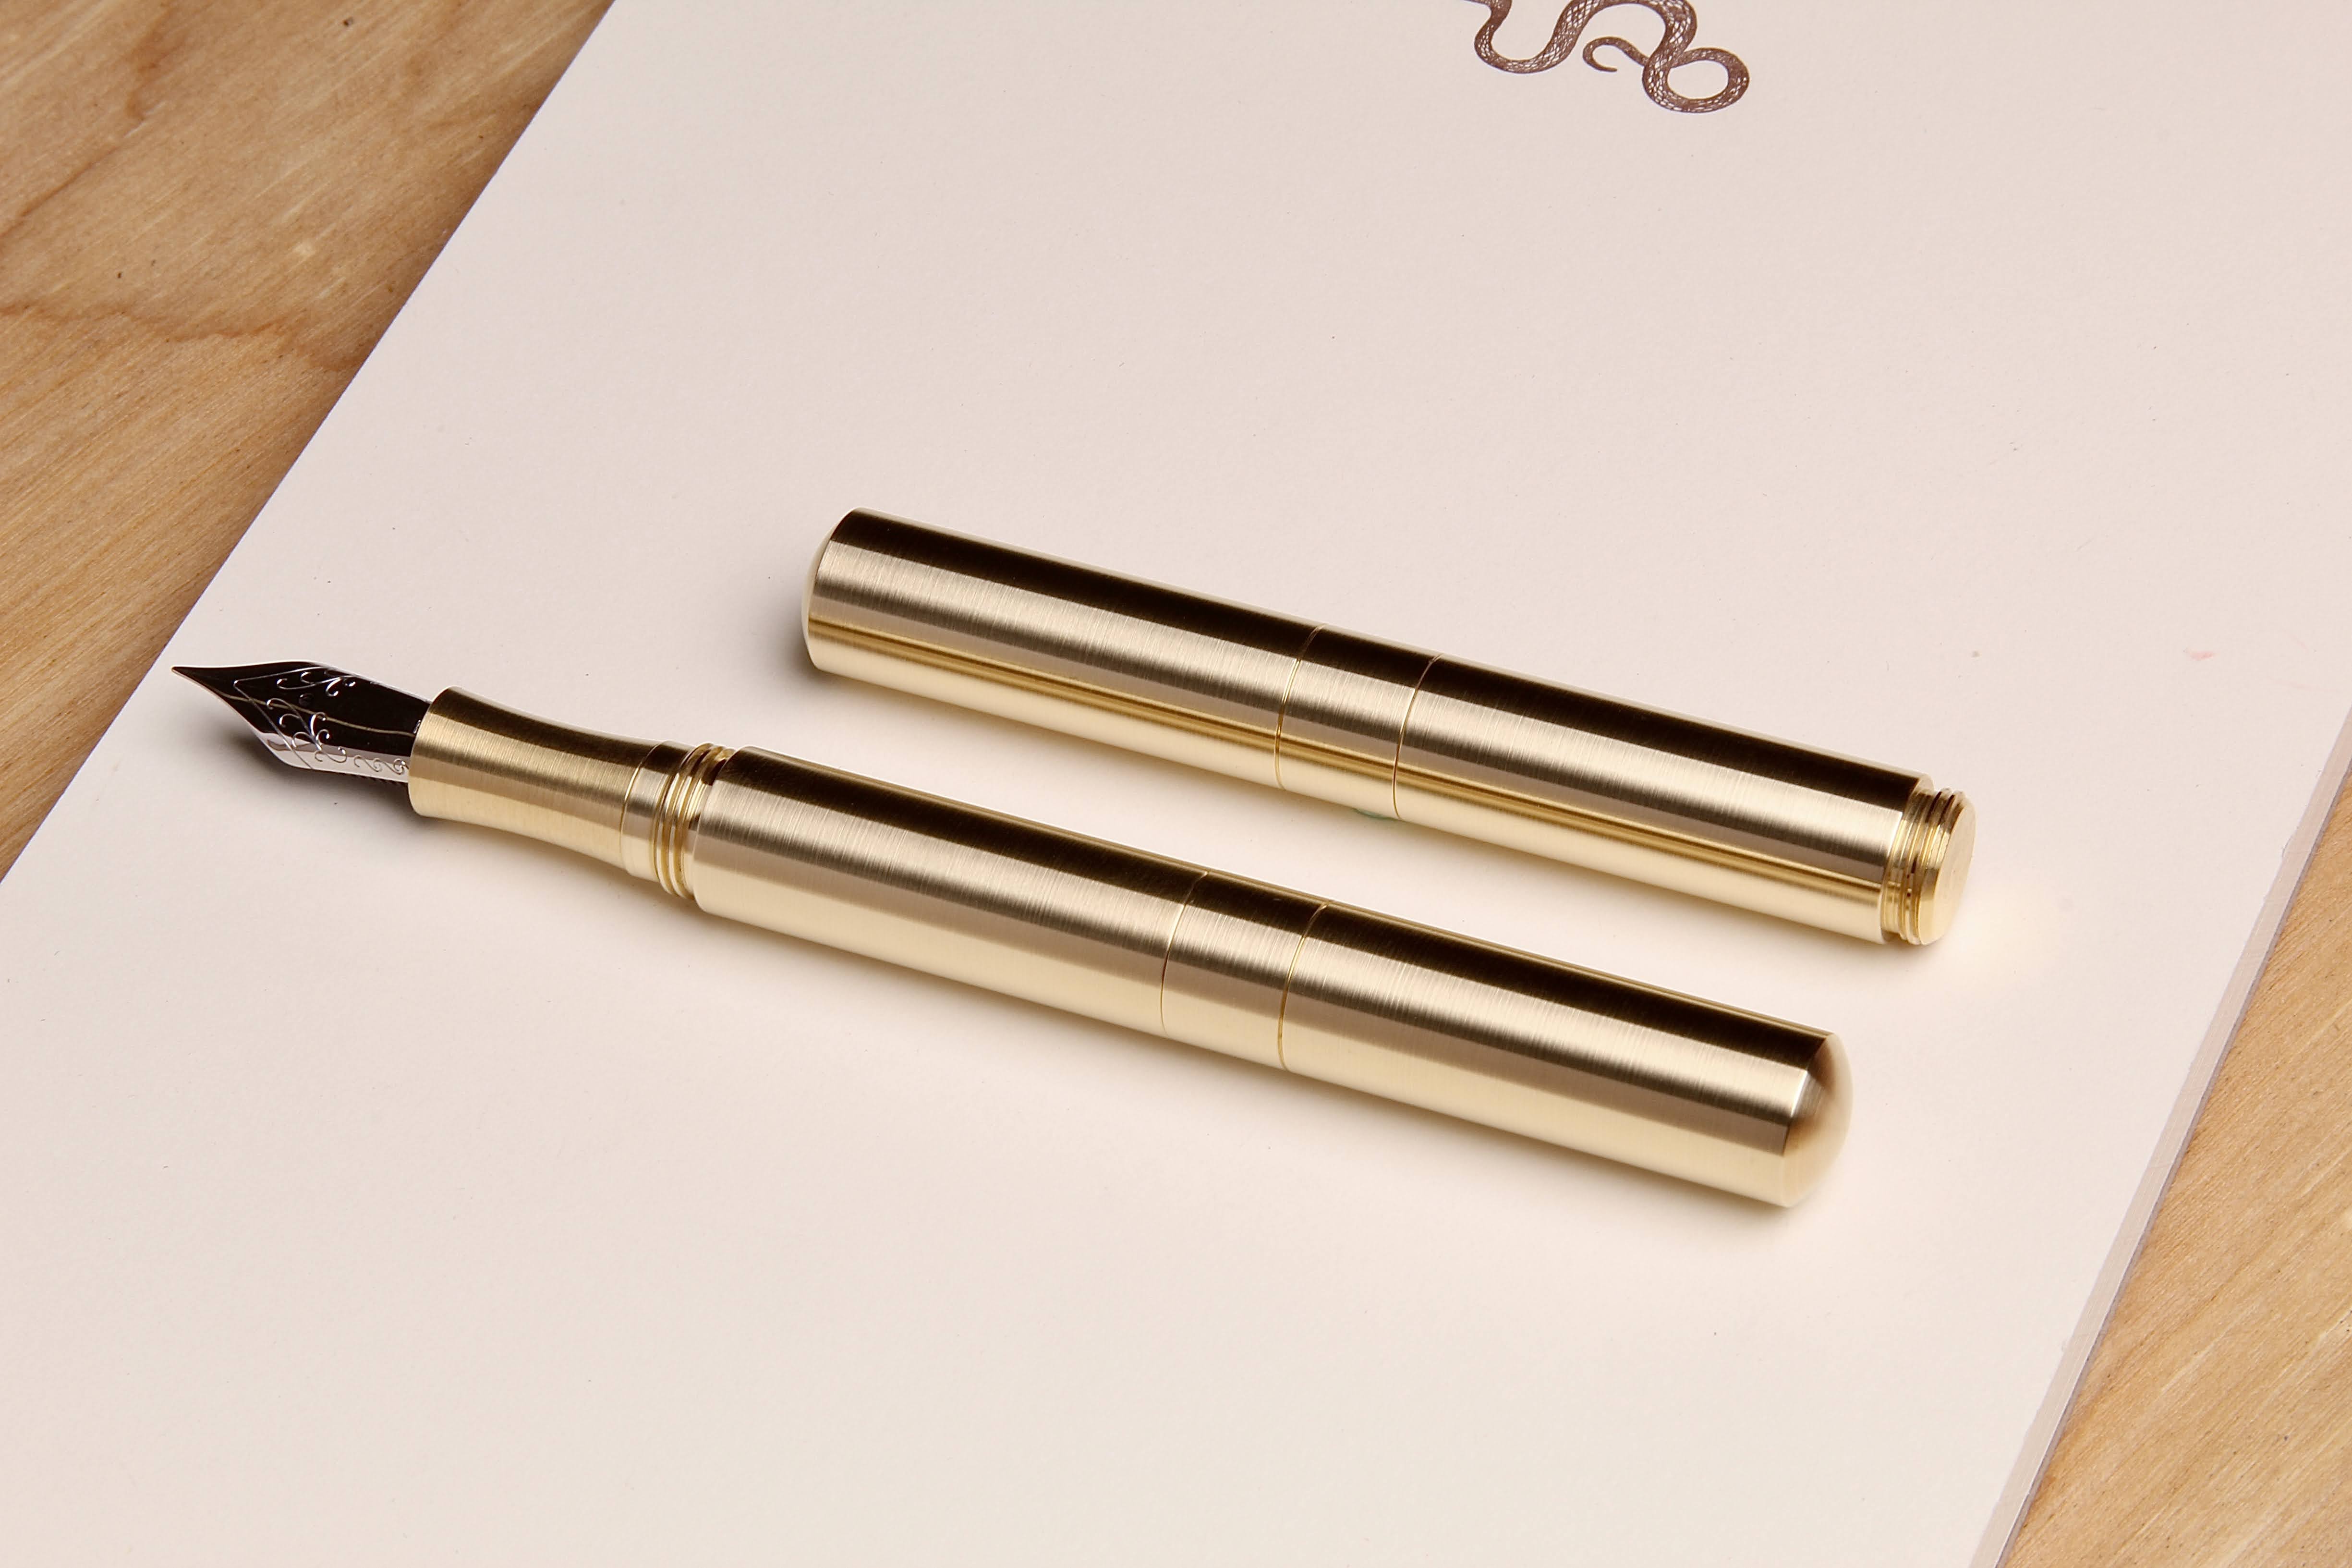 Solid Brass and Faceted Brass "Pocket Six" Fountain Pen